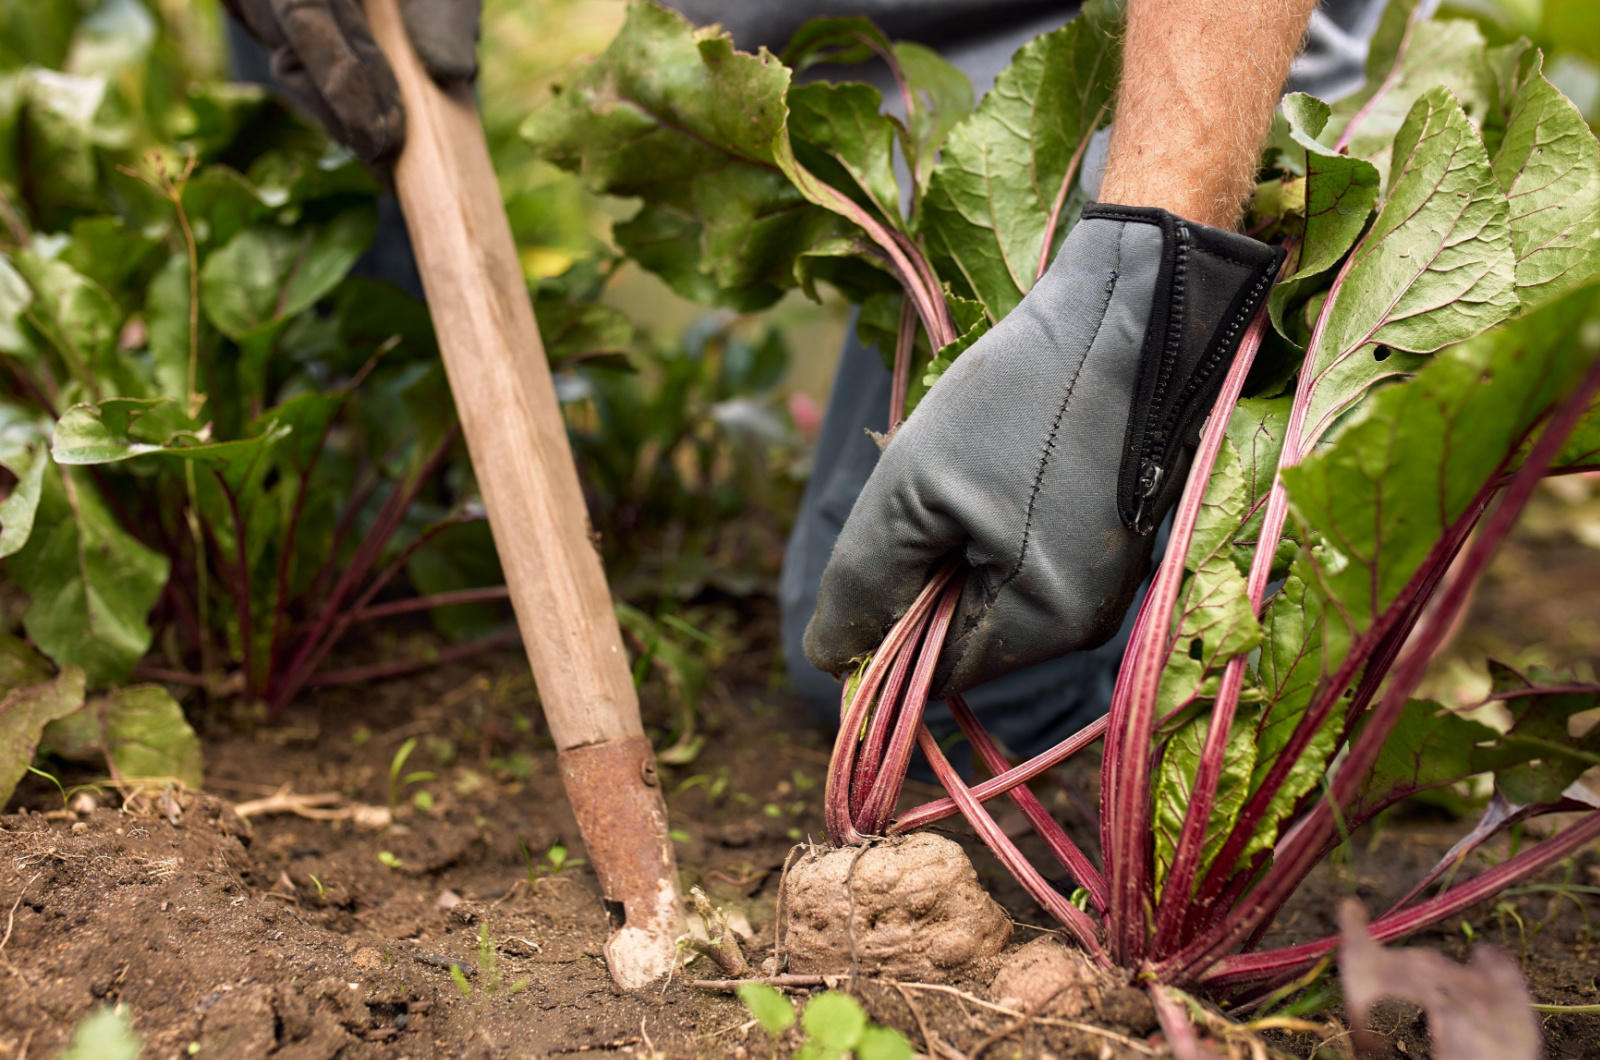 Farmer's hands pulling out ripe beets